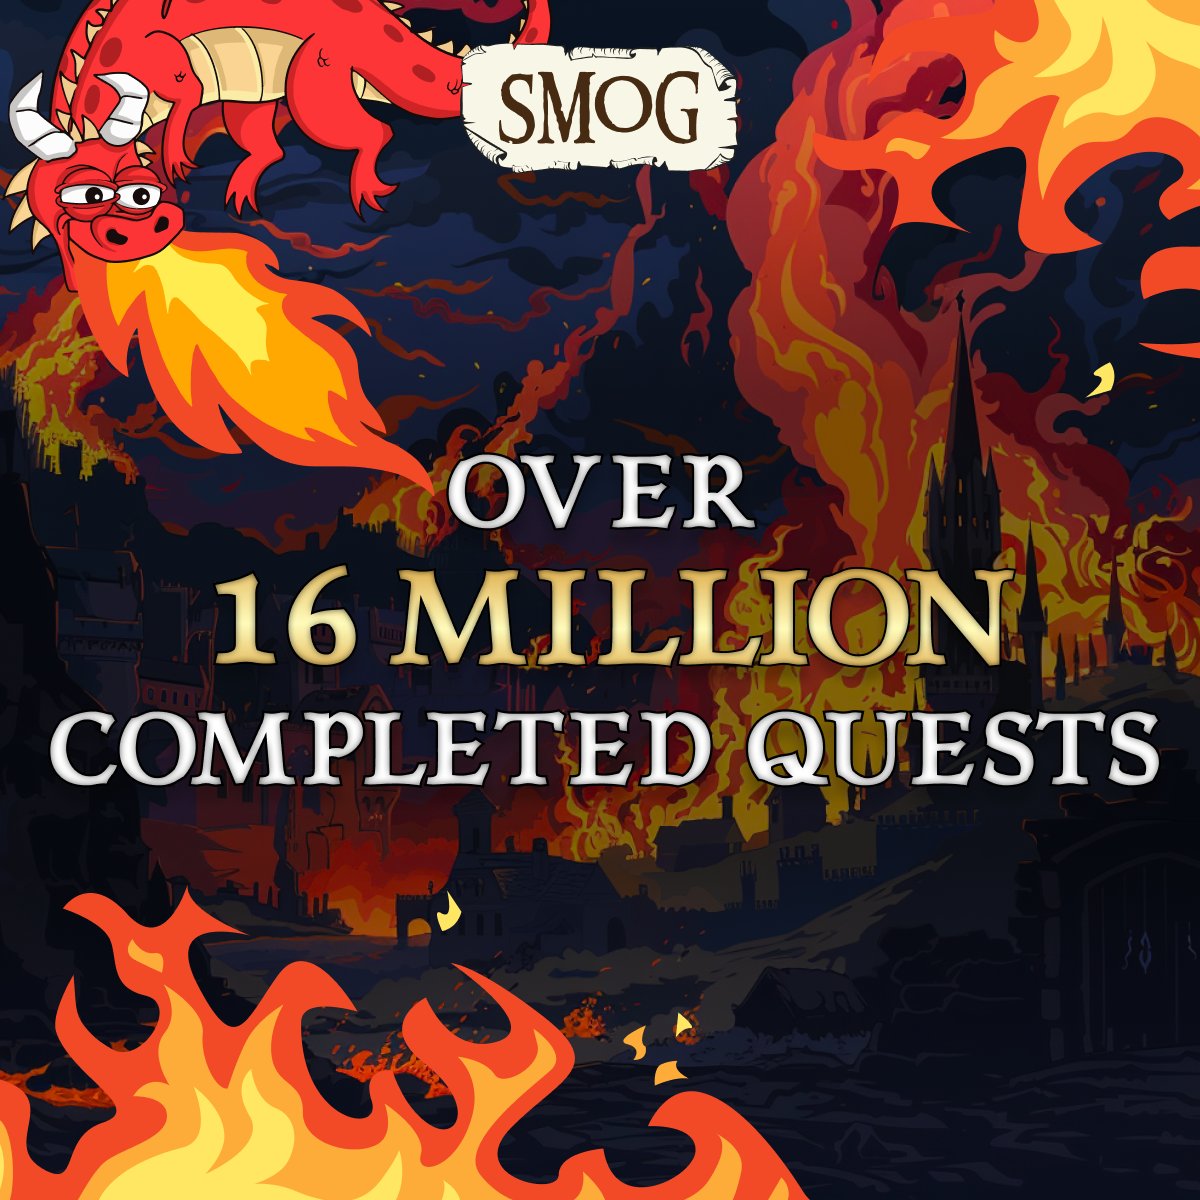 Fantastic work, #Dragons! We've reached over 16 million completed quests on #Zealy! 👏 The #Dragon extends its gratitude to all! 🙌🐲 Trade $SMOG and earn extra XP rewards! 💰 Join our growing #SMOG community today and be part of the adventure! 🚀 bitesly.io/b_SMOG_MEXC